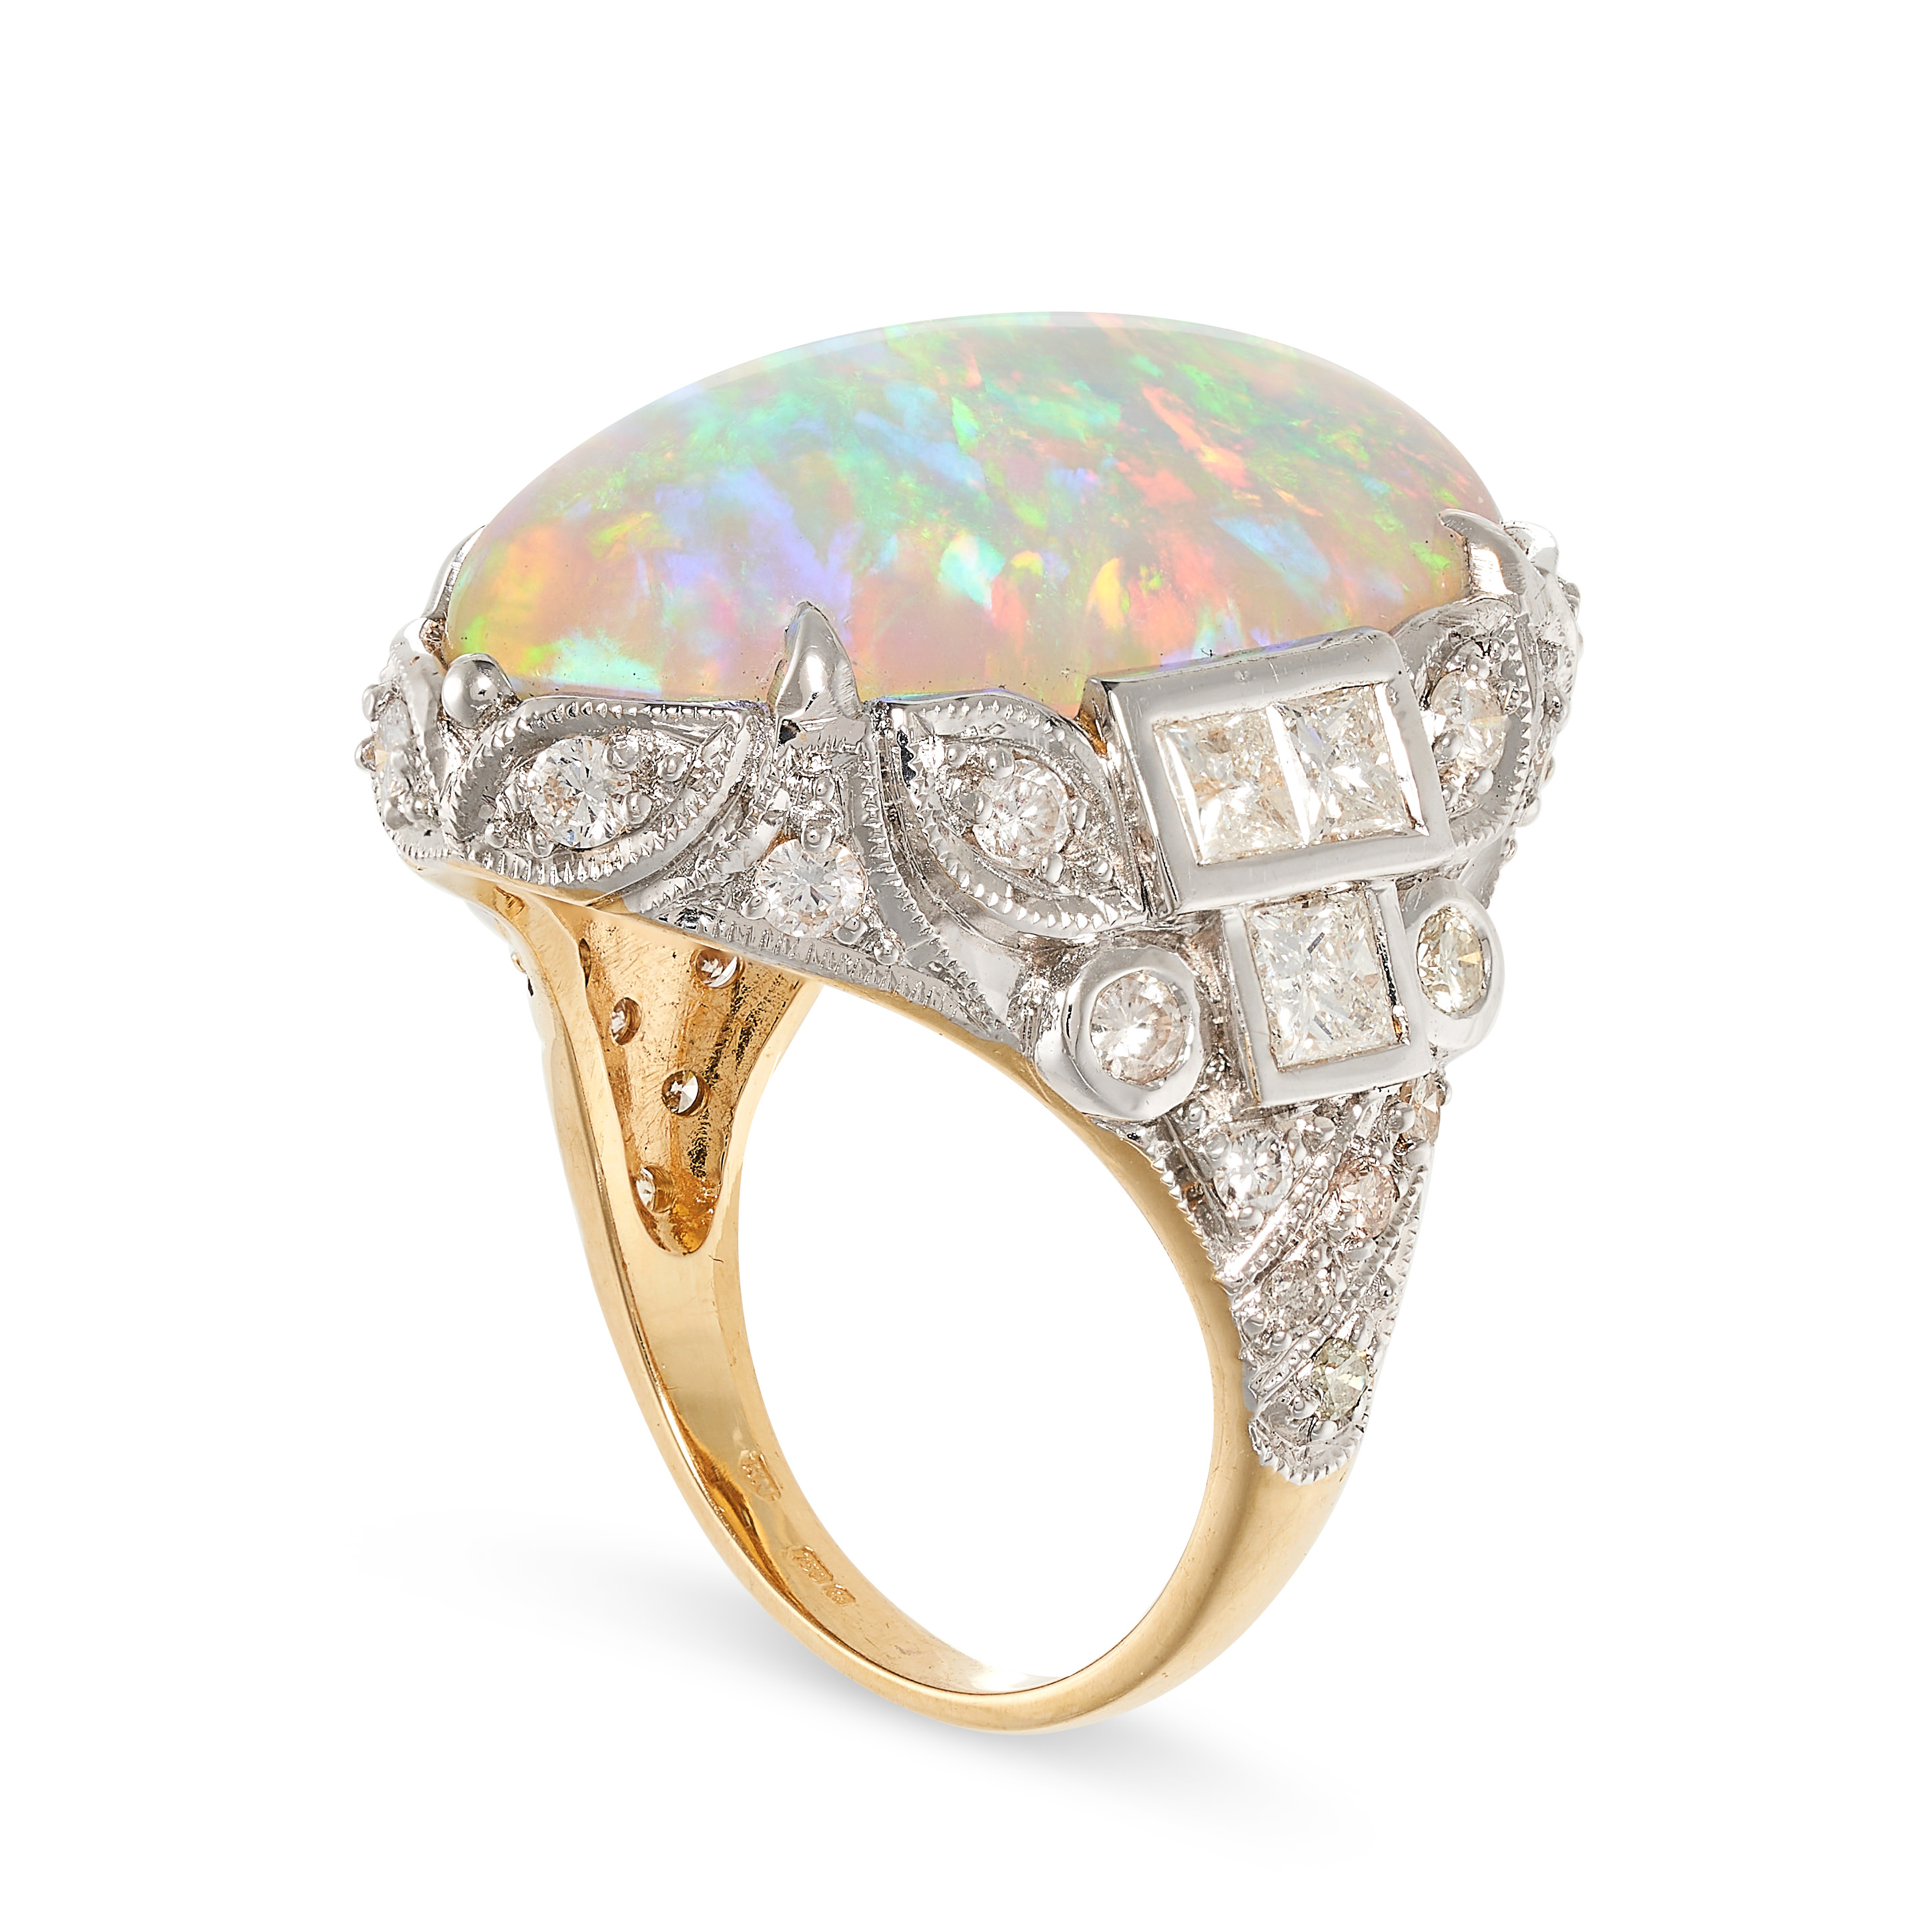 AN OPAL AND DIAMOND DRESS RING in 18ct yellow and white gold, set with an oval cabochon opal - Image 2 of 2